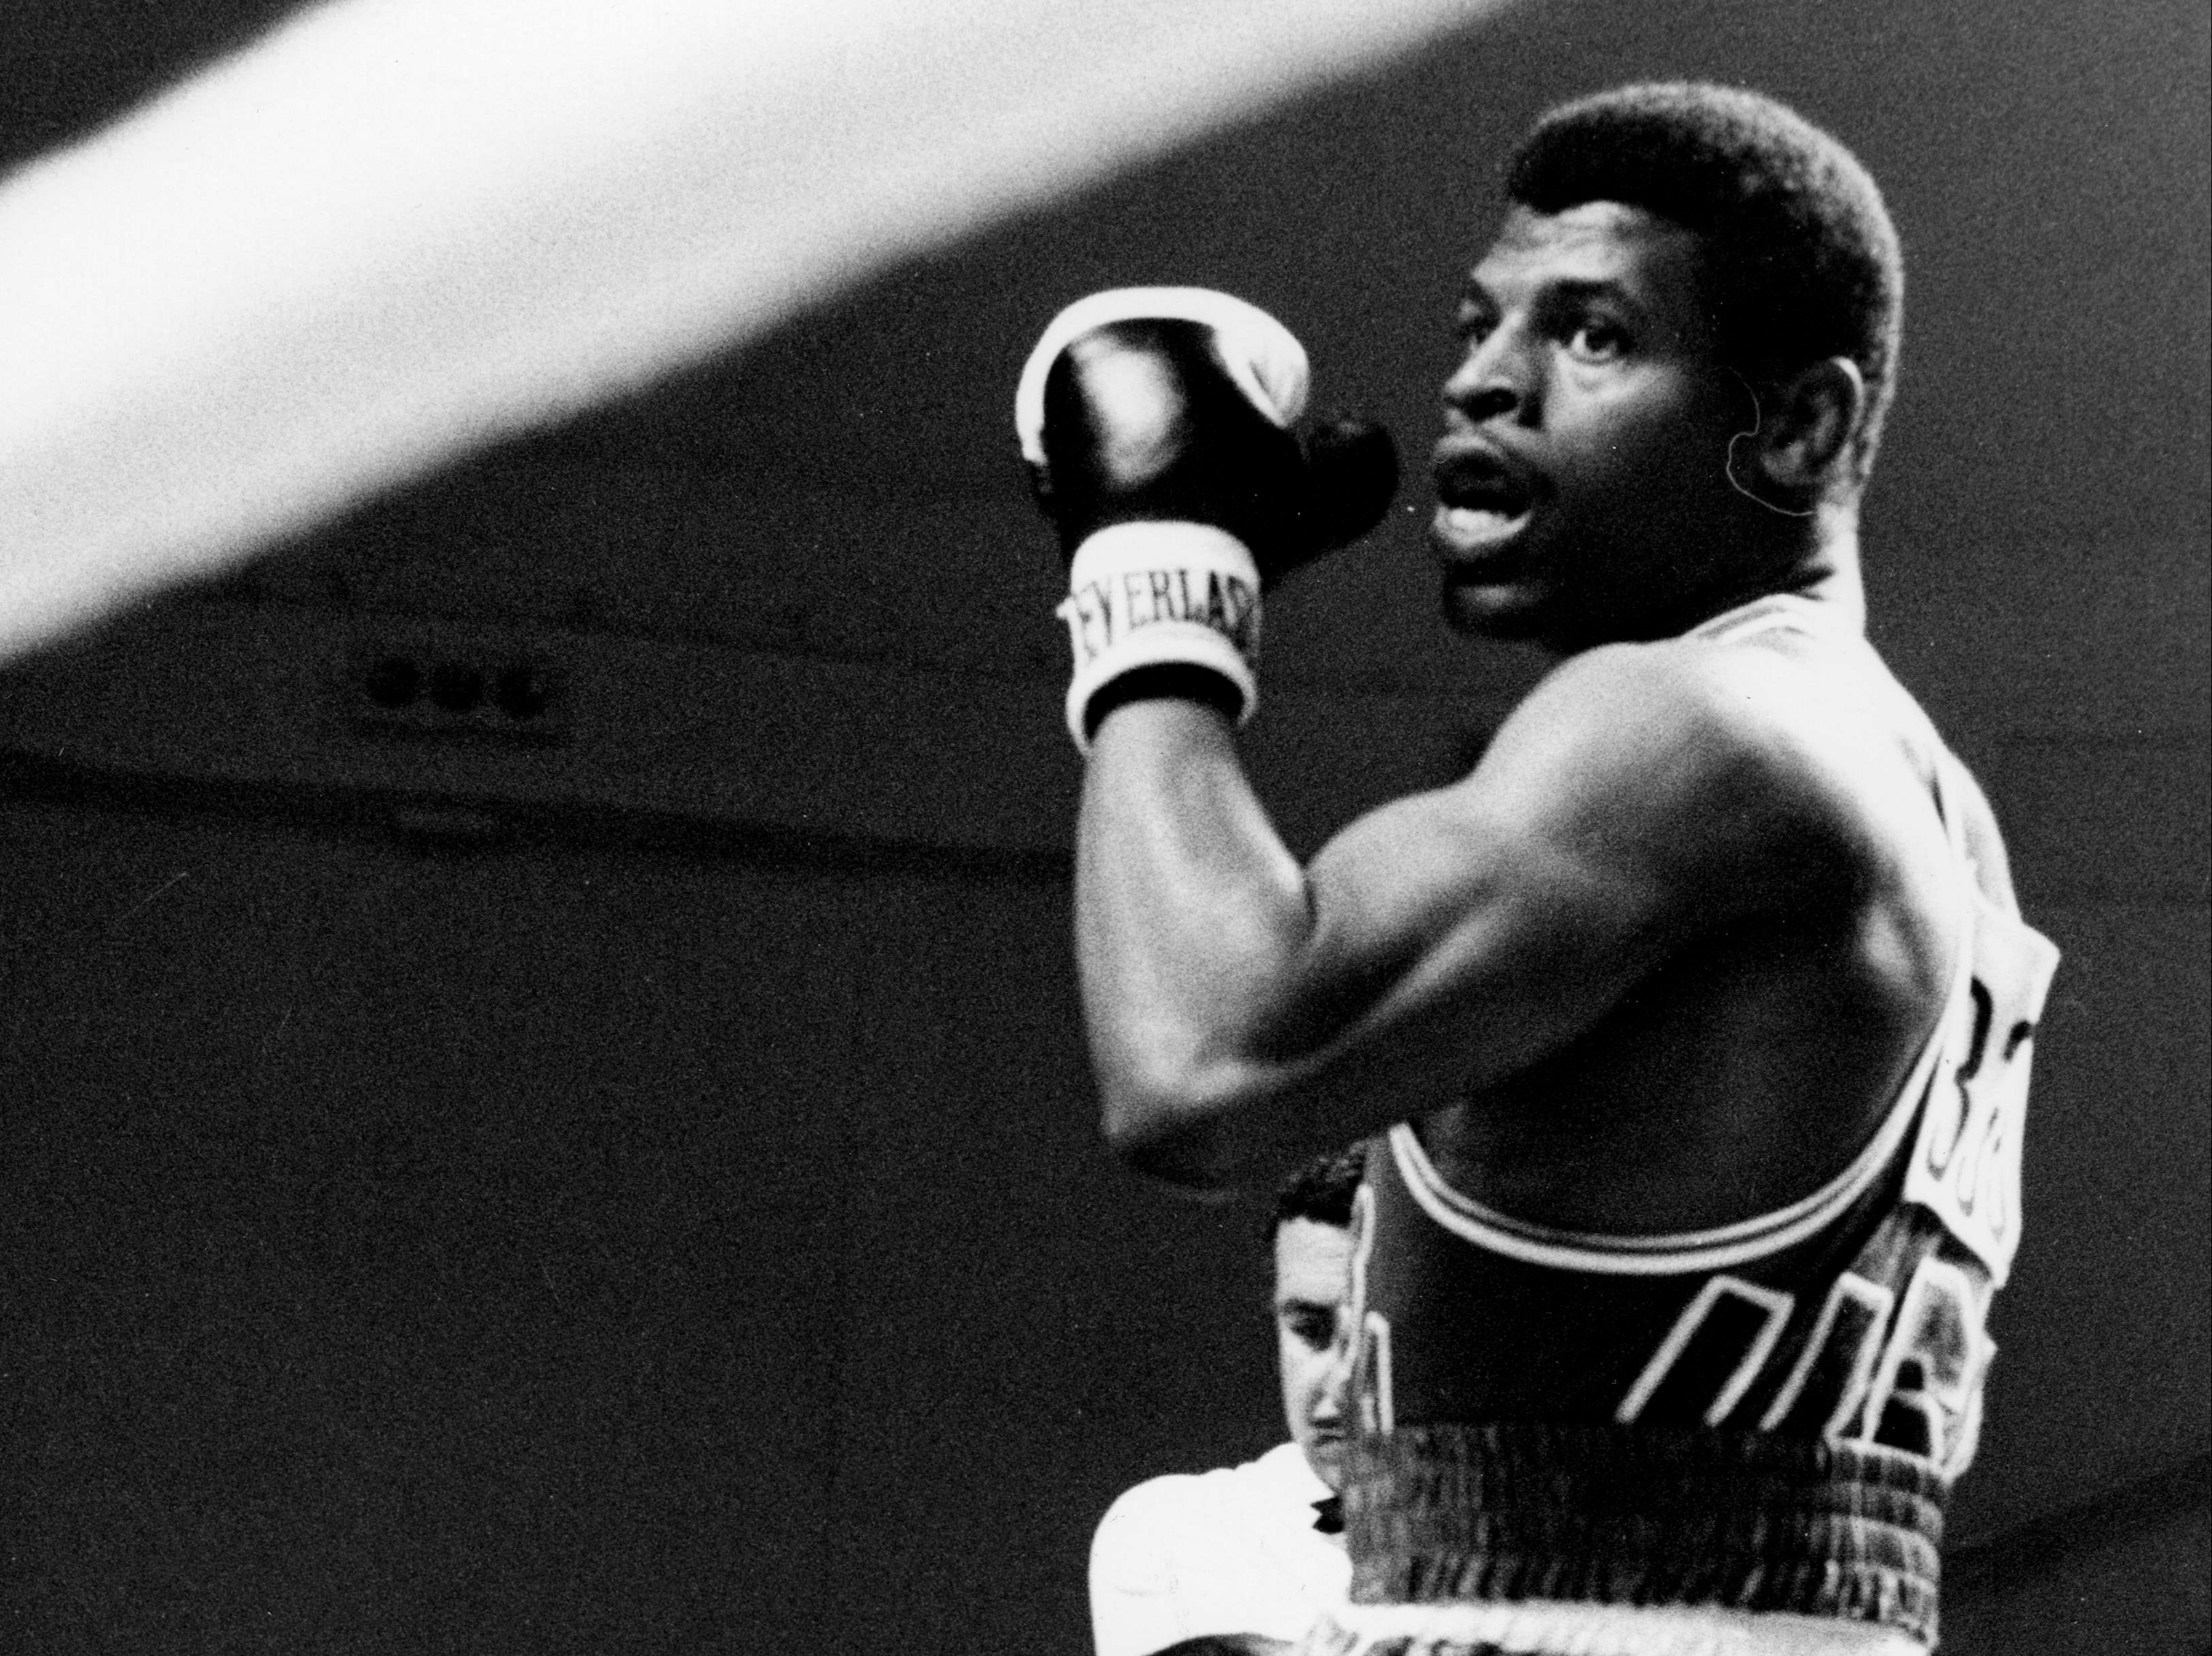 Leon Spinks won gold for the United States at the 1976 Olympics